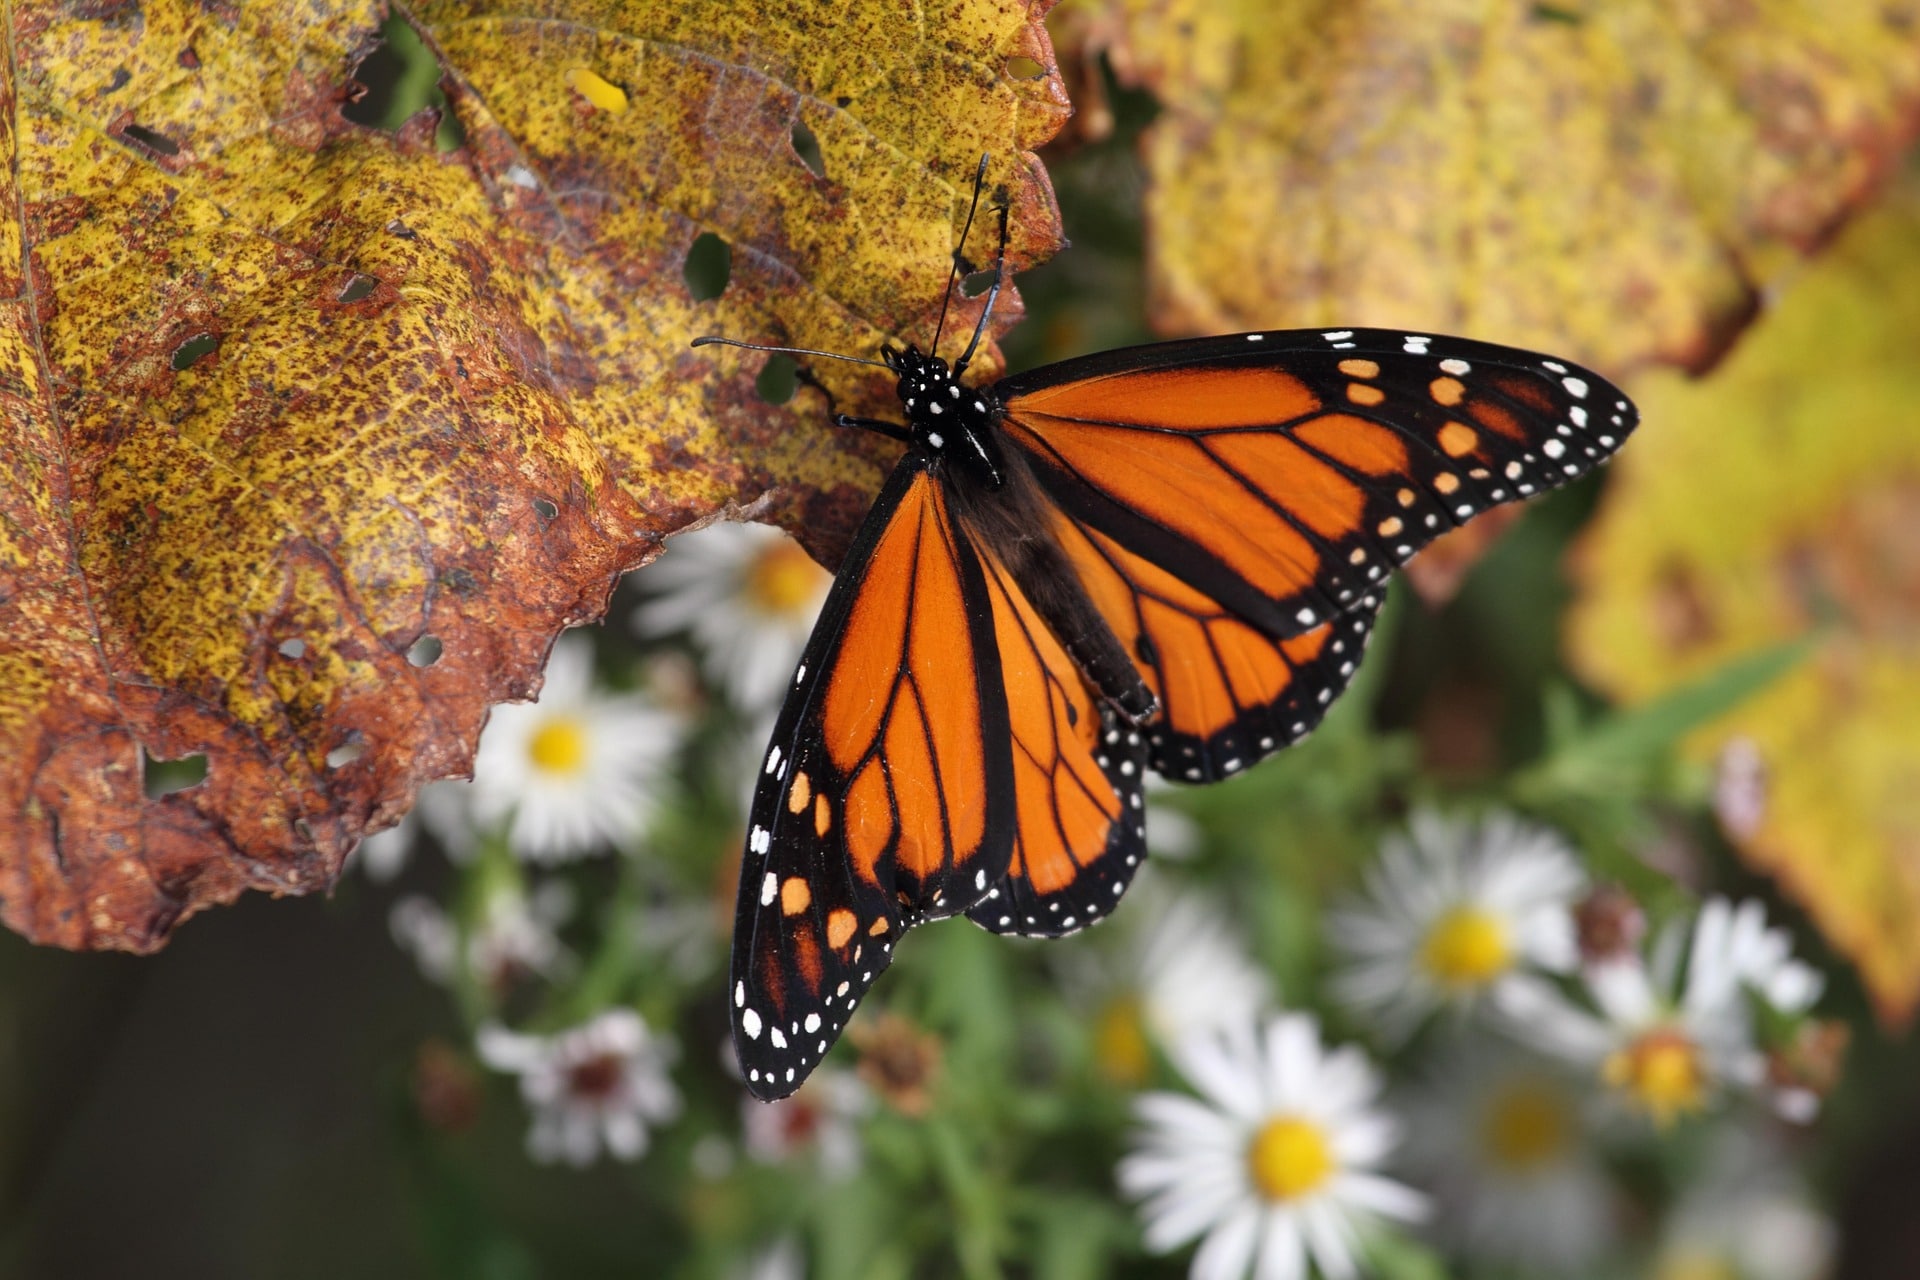 Pesticide companies are driving monarchs to extinction